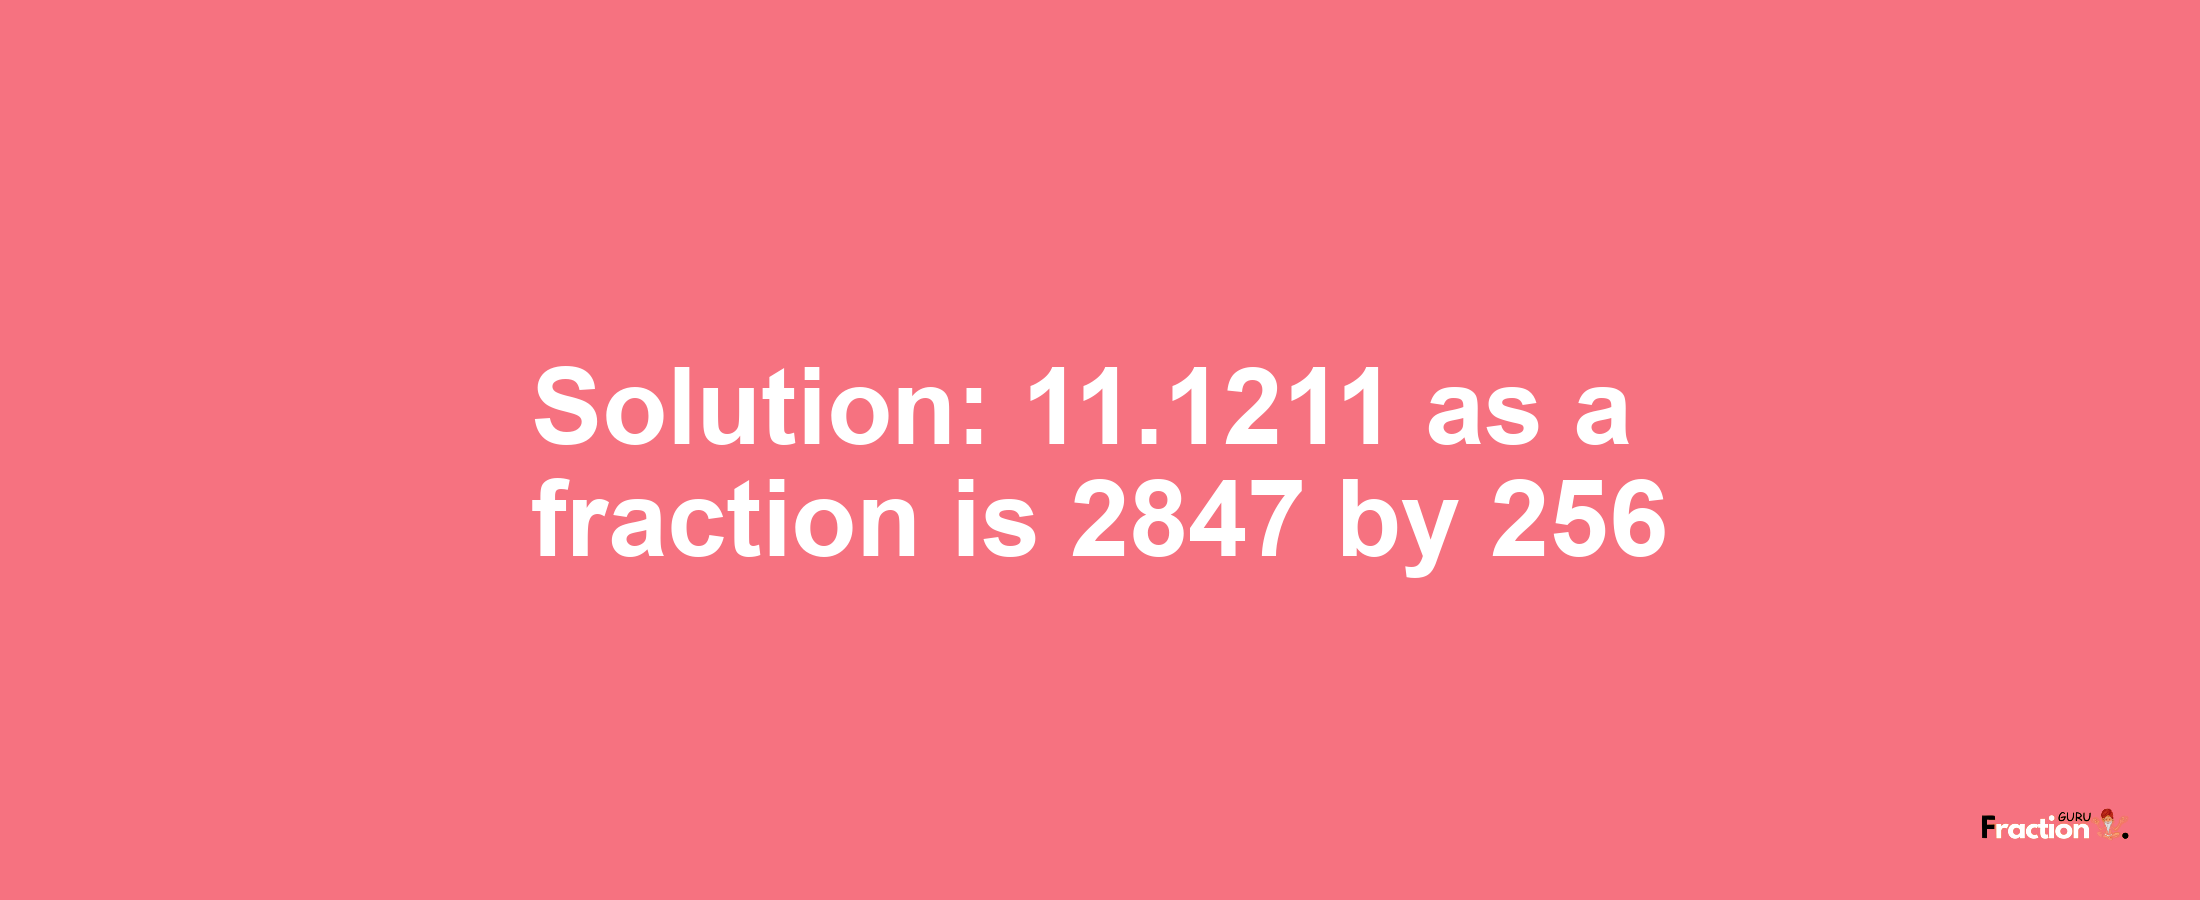 Solution:11.1211 as a fraction is 2847/256